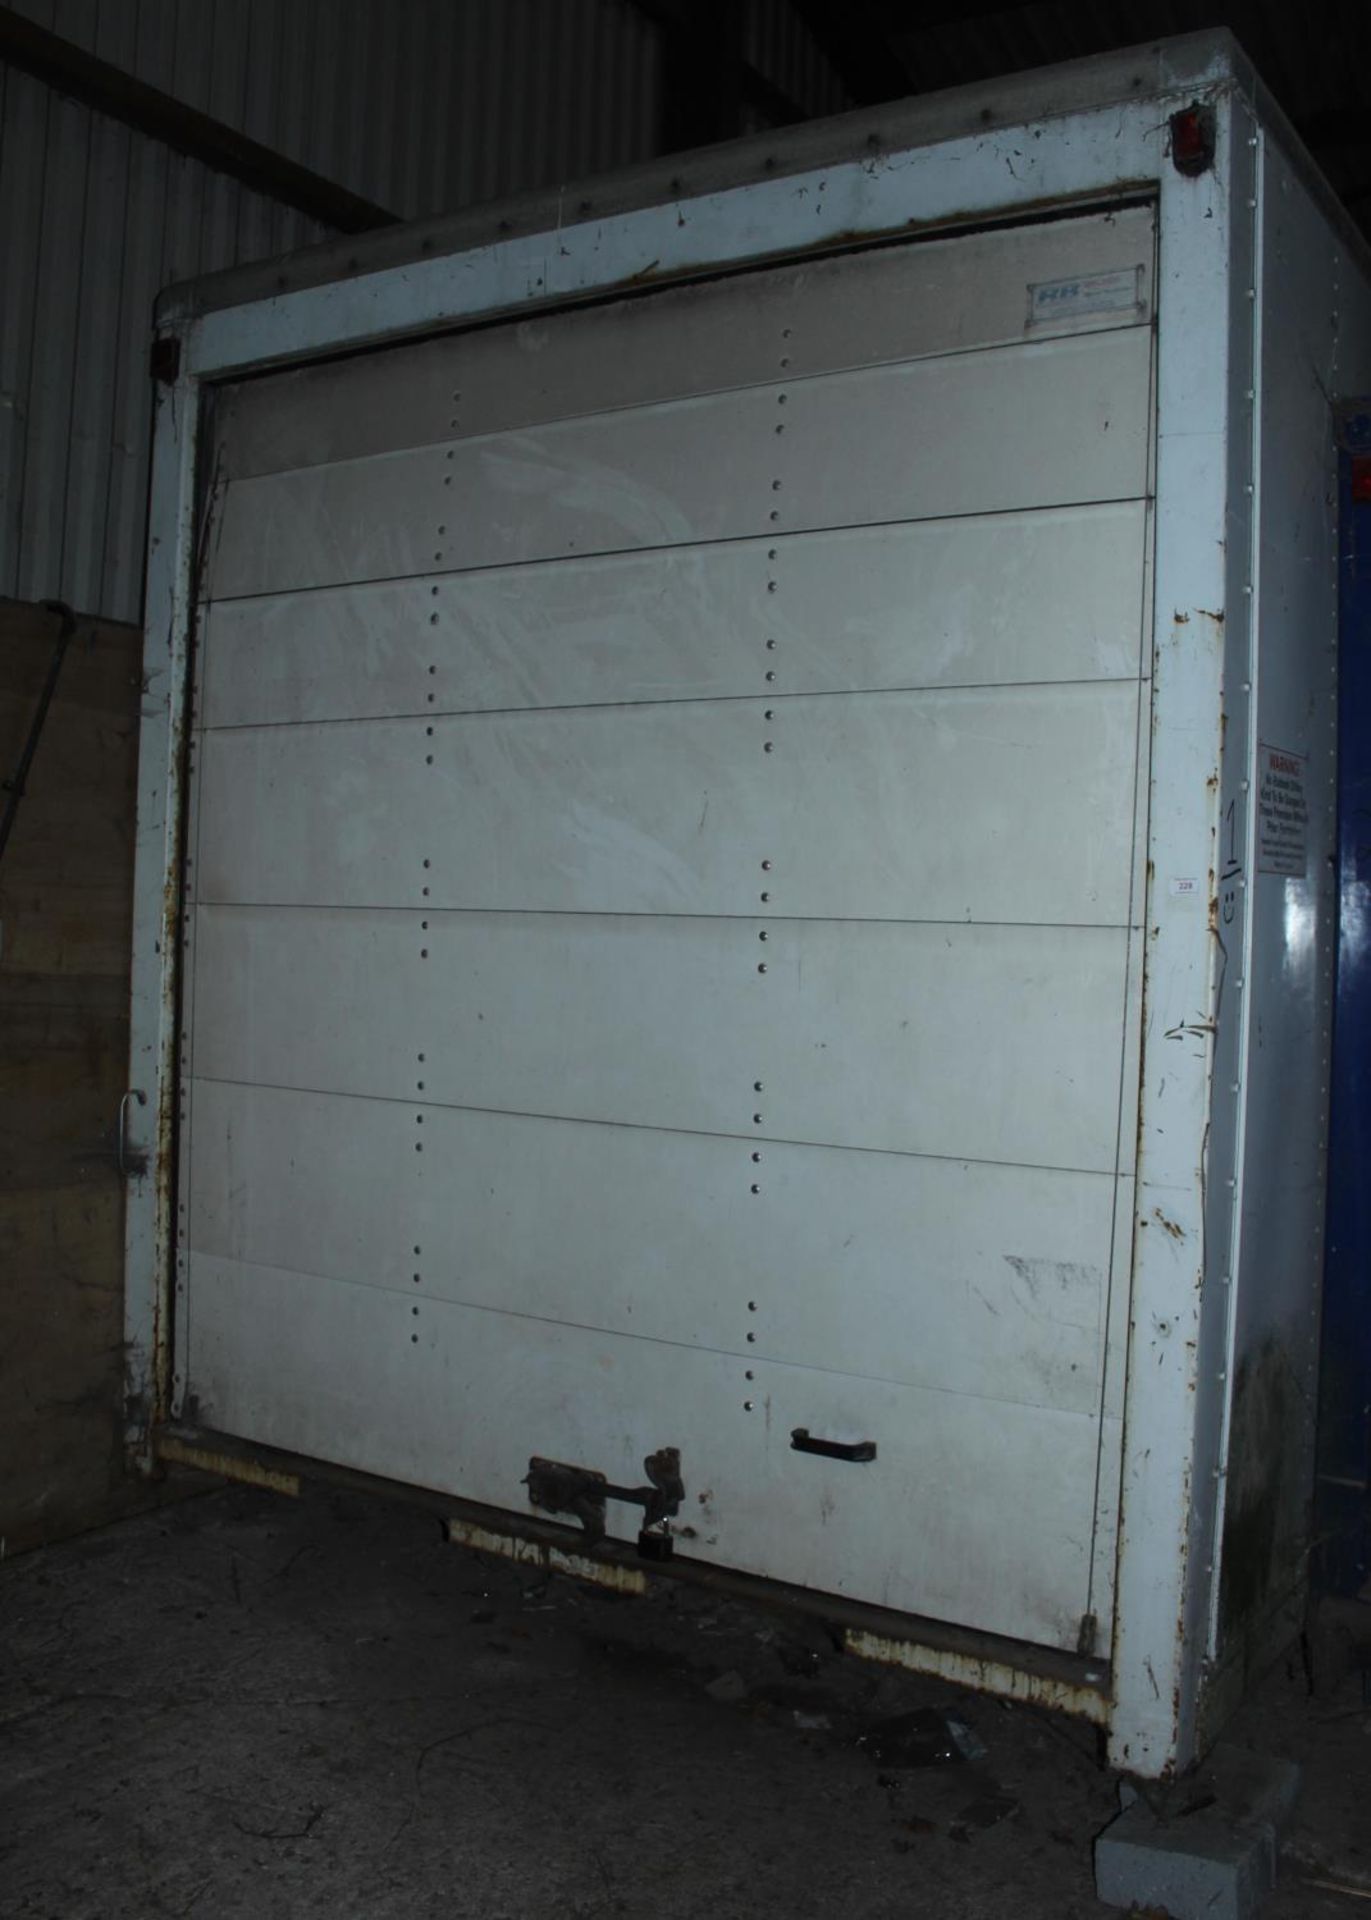 A LORRY BODY 20'2" LONG 7'11" WIDE 9'4" HIGH WITH DAMAGED FRONT CORNER, STORED INSIDE